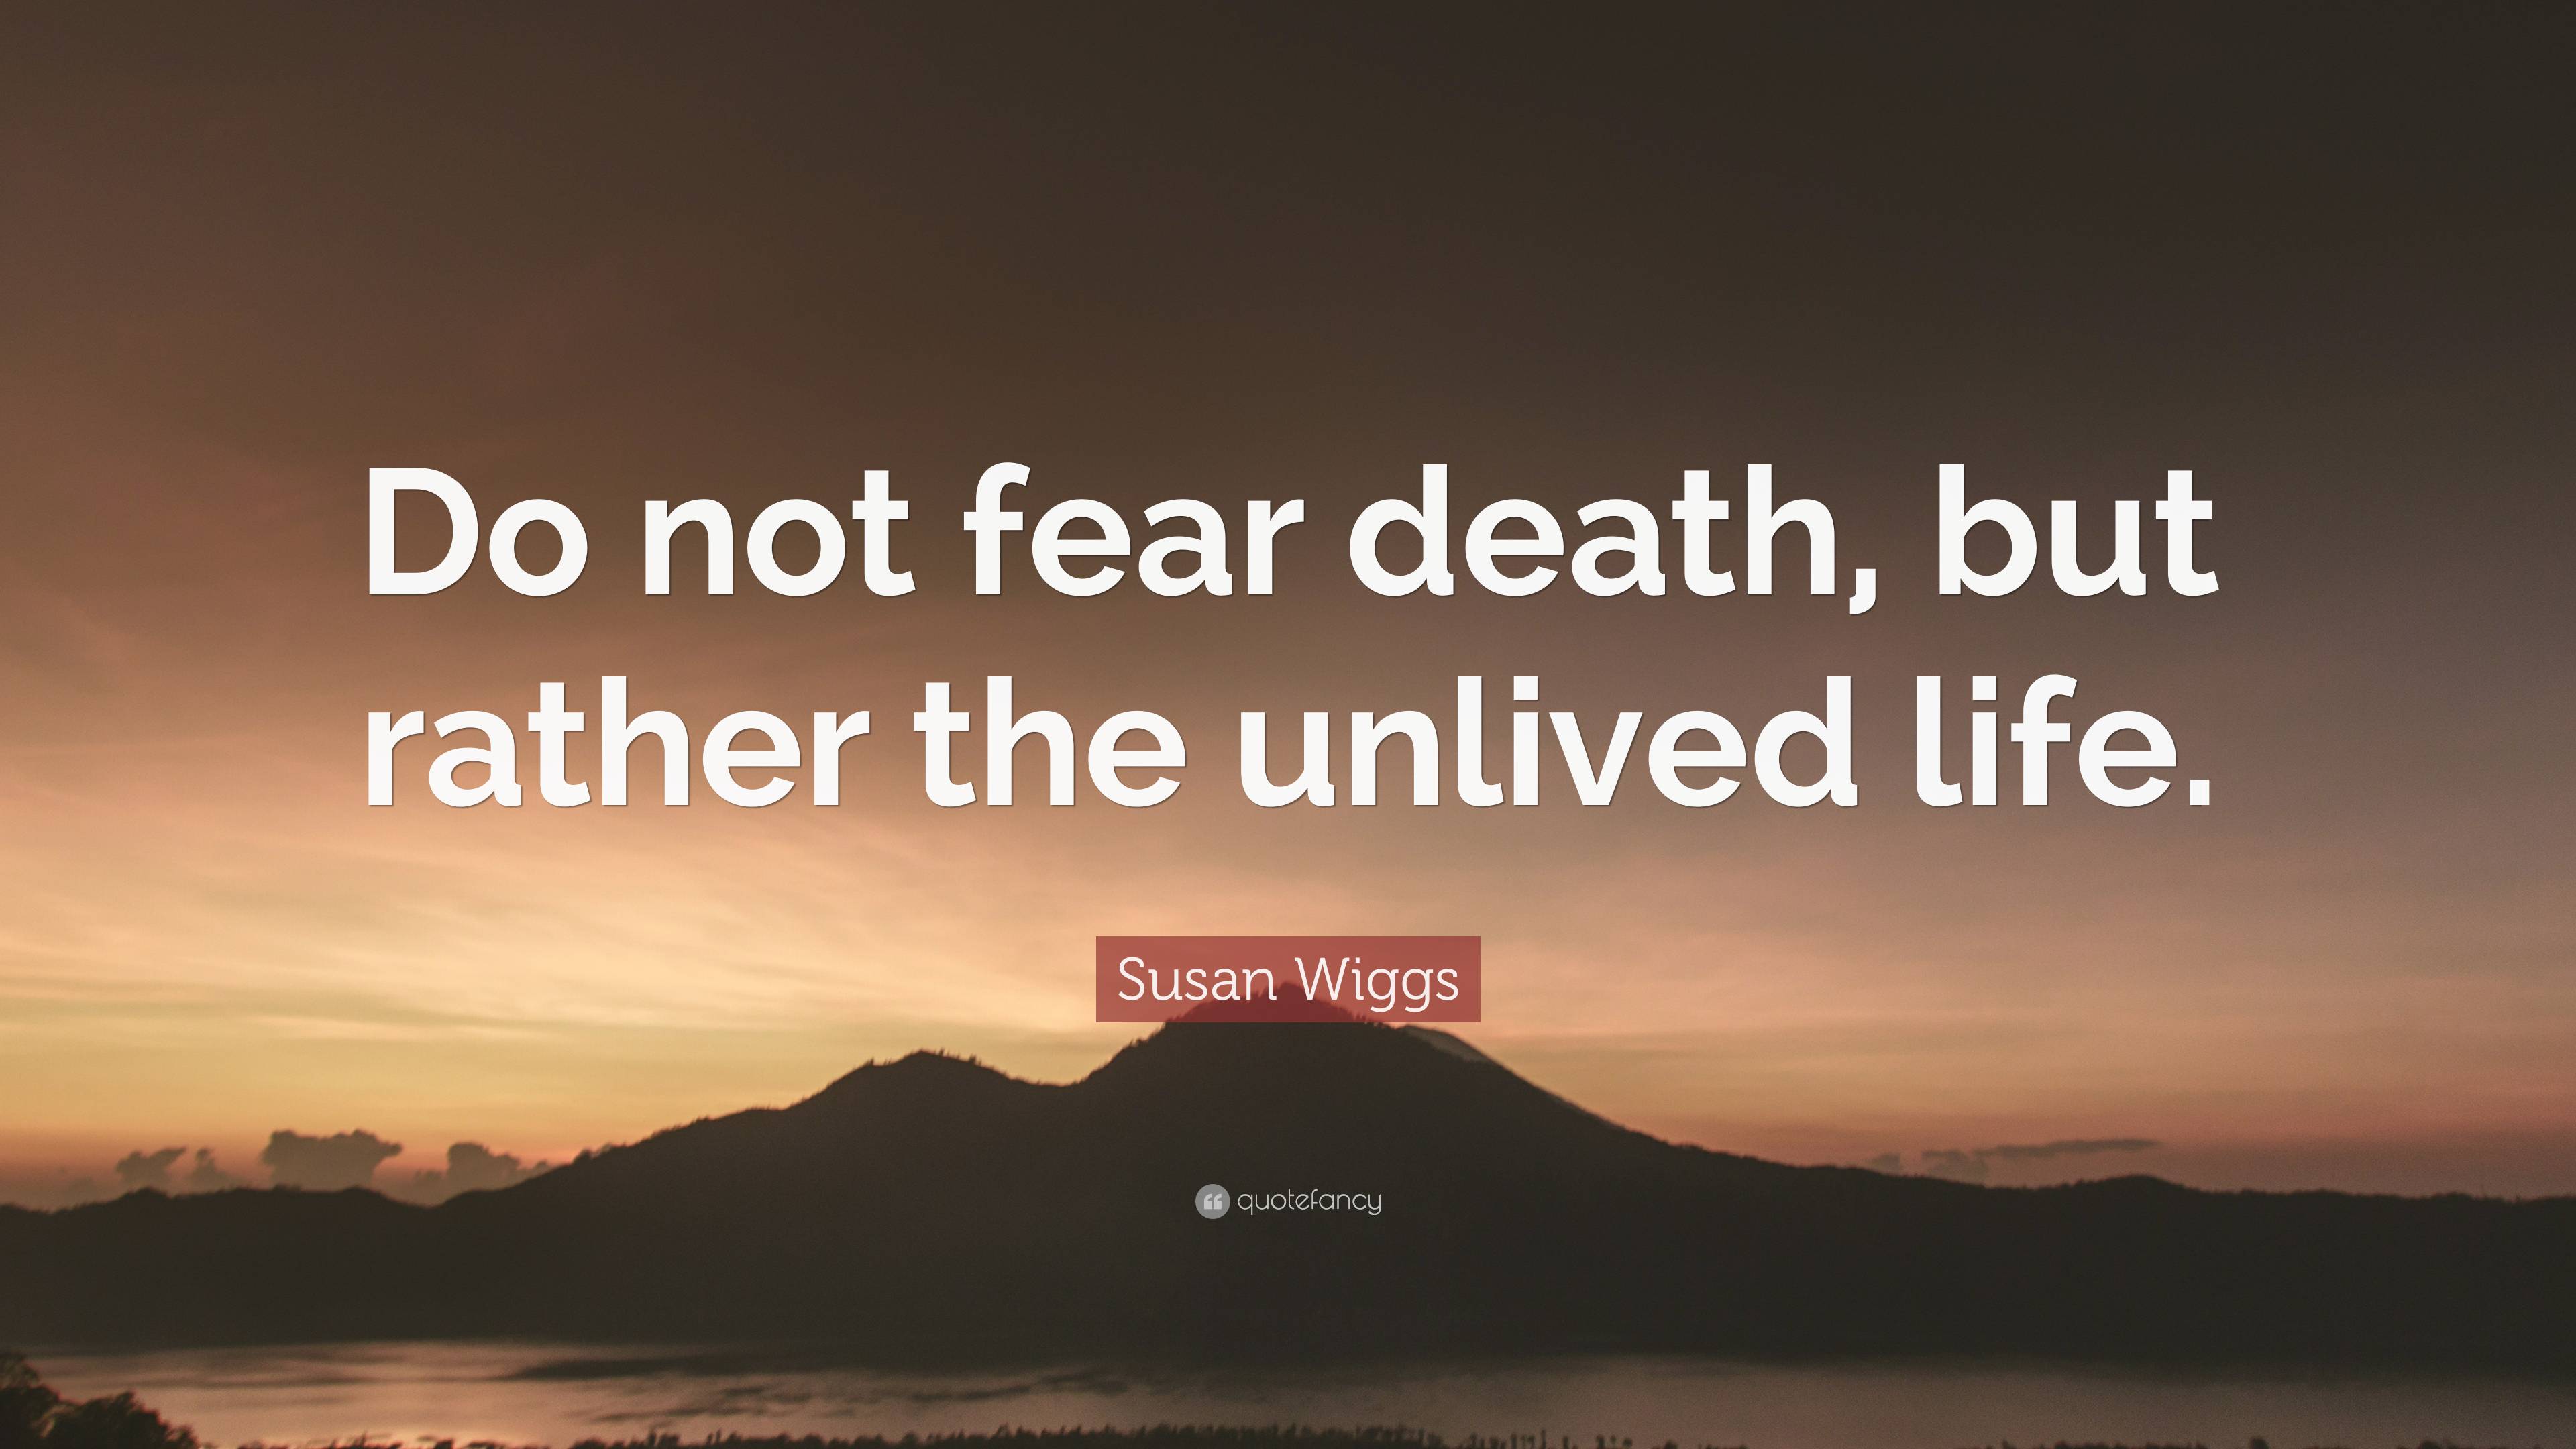 Susan Wiggs Quote: “Do not fear death, but rather the unlived life.”